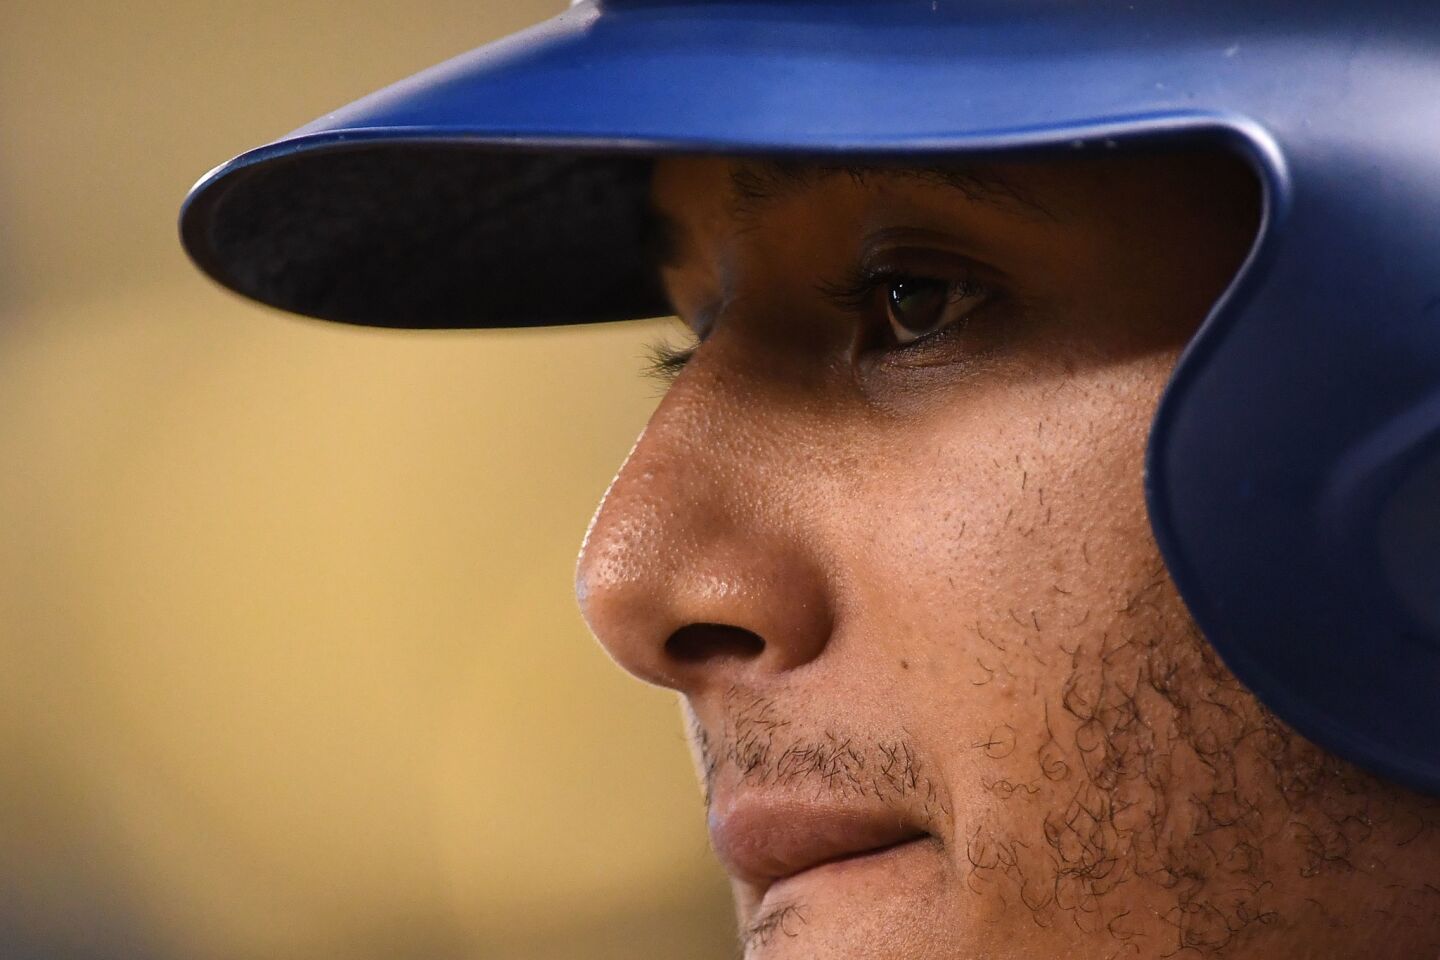 PHOENIX, AZ - SEPTEMBER 26: Manny Machado #8 of the Los Angeles Dodgers looks on during the seventh inning of the MLB game against the Arizona Diamondbacks at Chase Field on September 26, 2018 in Phoenix, Arizona. (Photo by Jennifer Stewart/Getty Images) ** OUTS - ELSENT, FPG, CM - OUTS * NM, PH, VA if sourced by CT, LA or MoD **